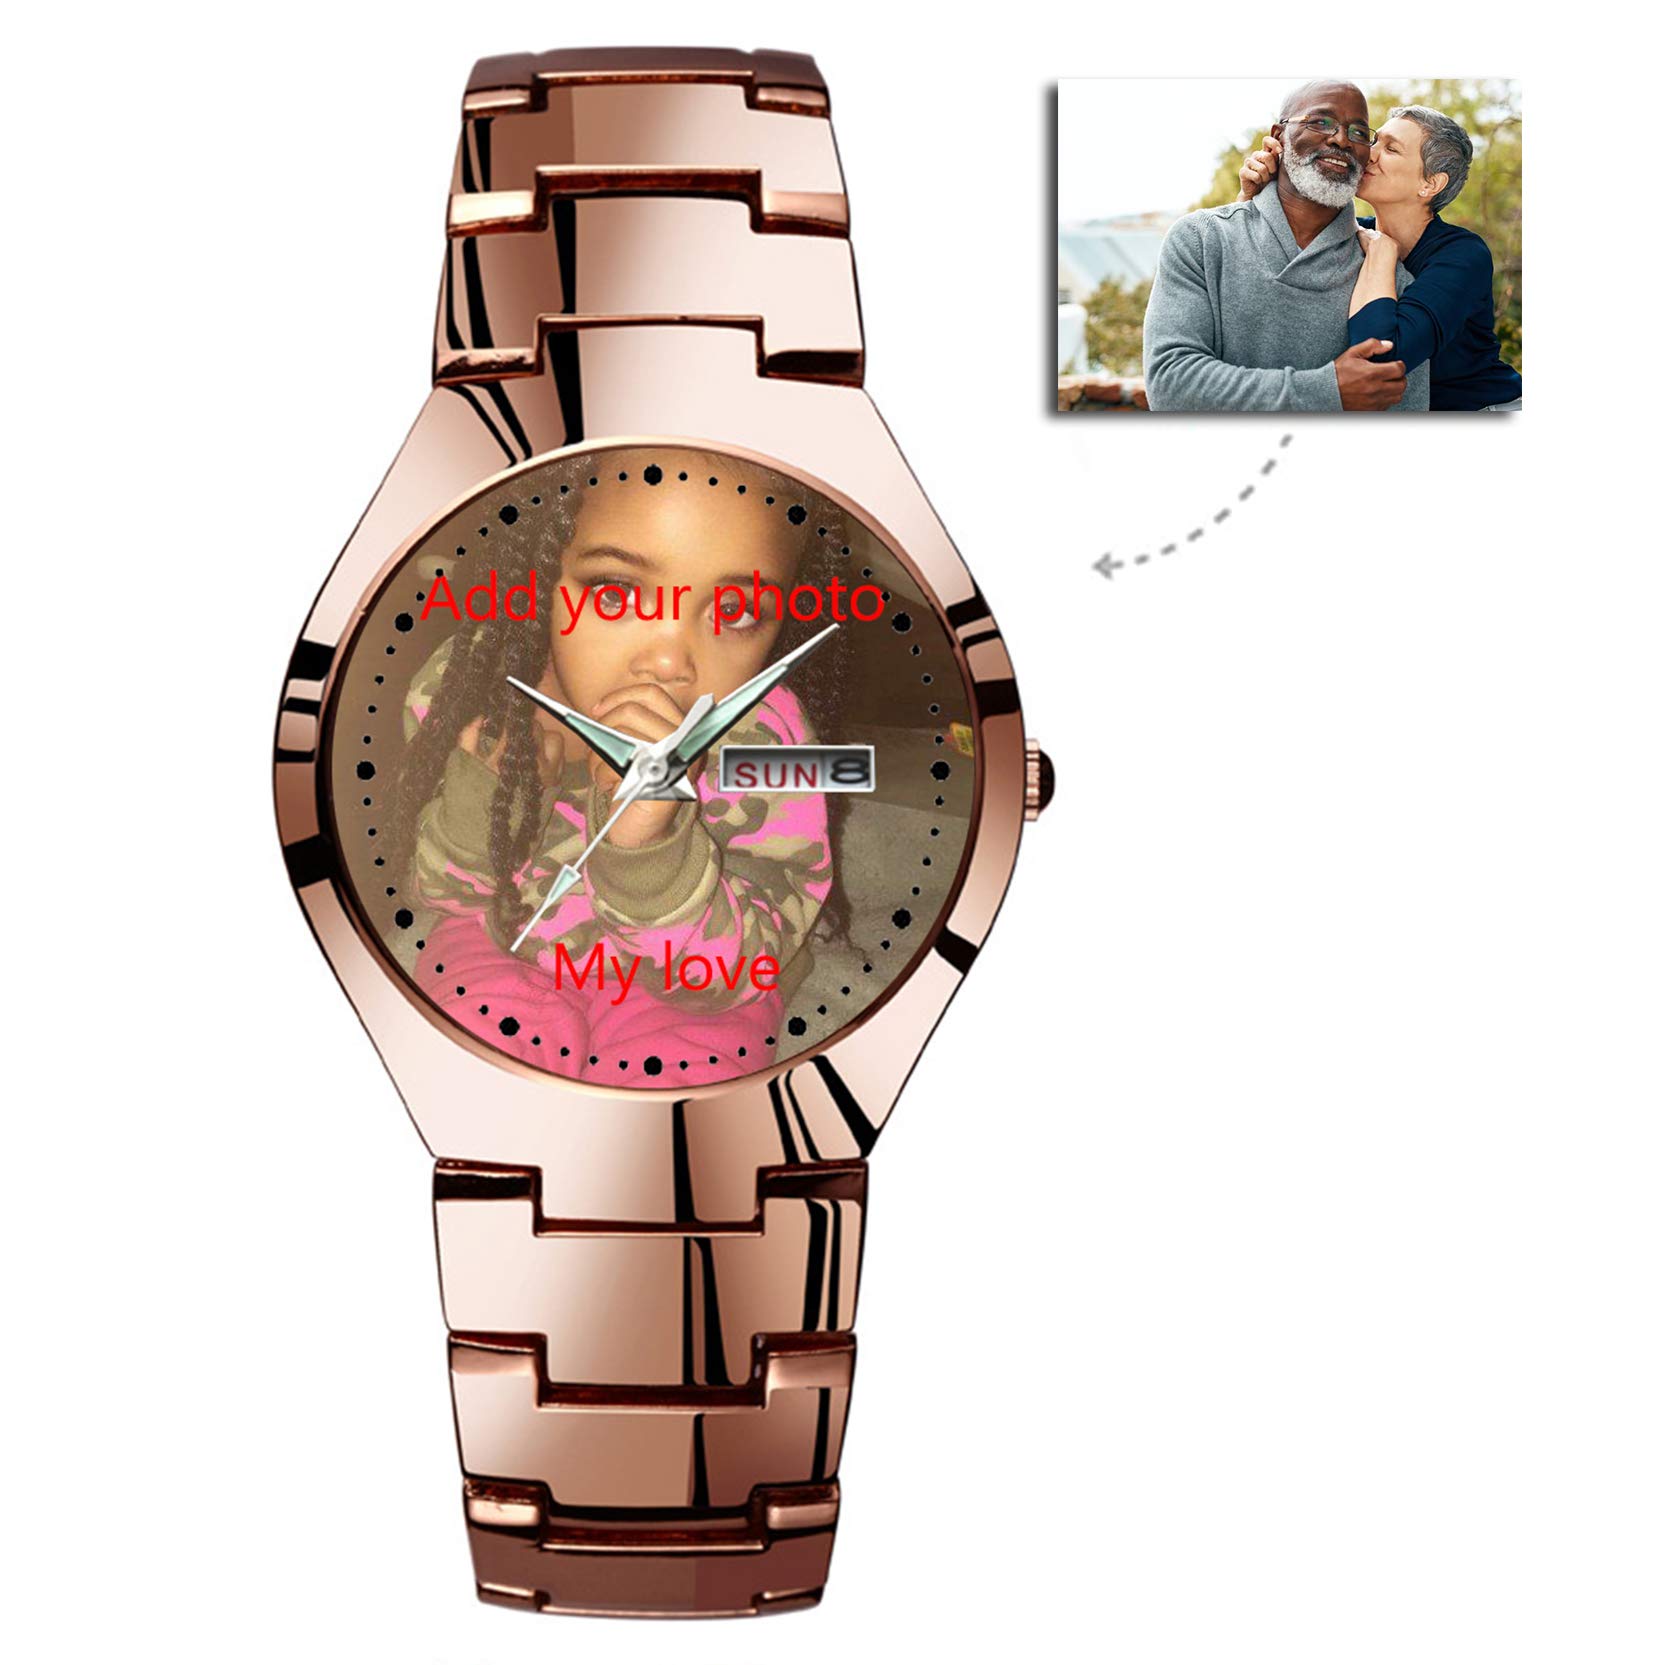 GIRLSIGHT Personalized Watch Custom Watches with Photo Picture Watch for Men, Personalized Fathers Family Women Mens Couples Gift for Husband Or Dad 001